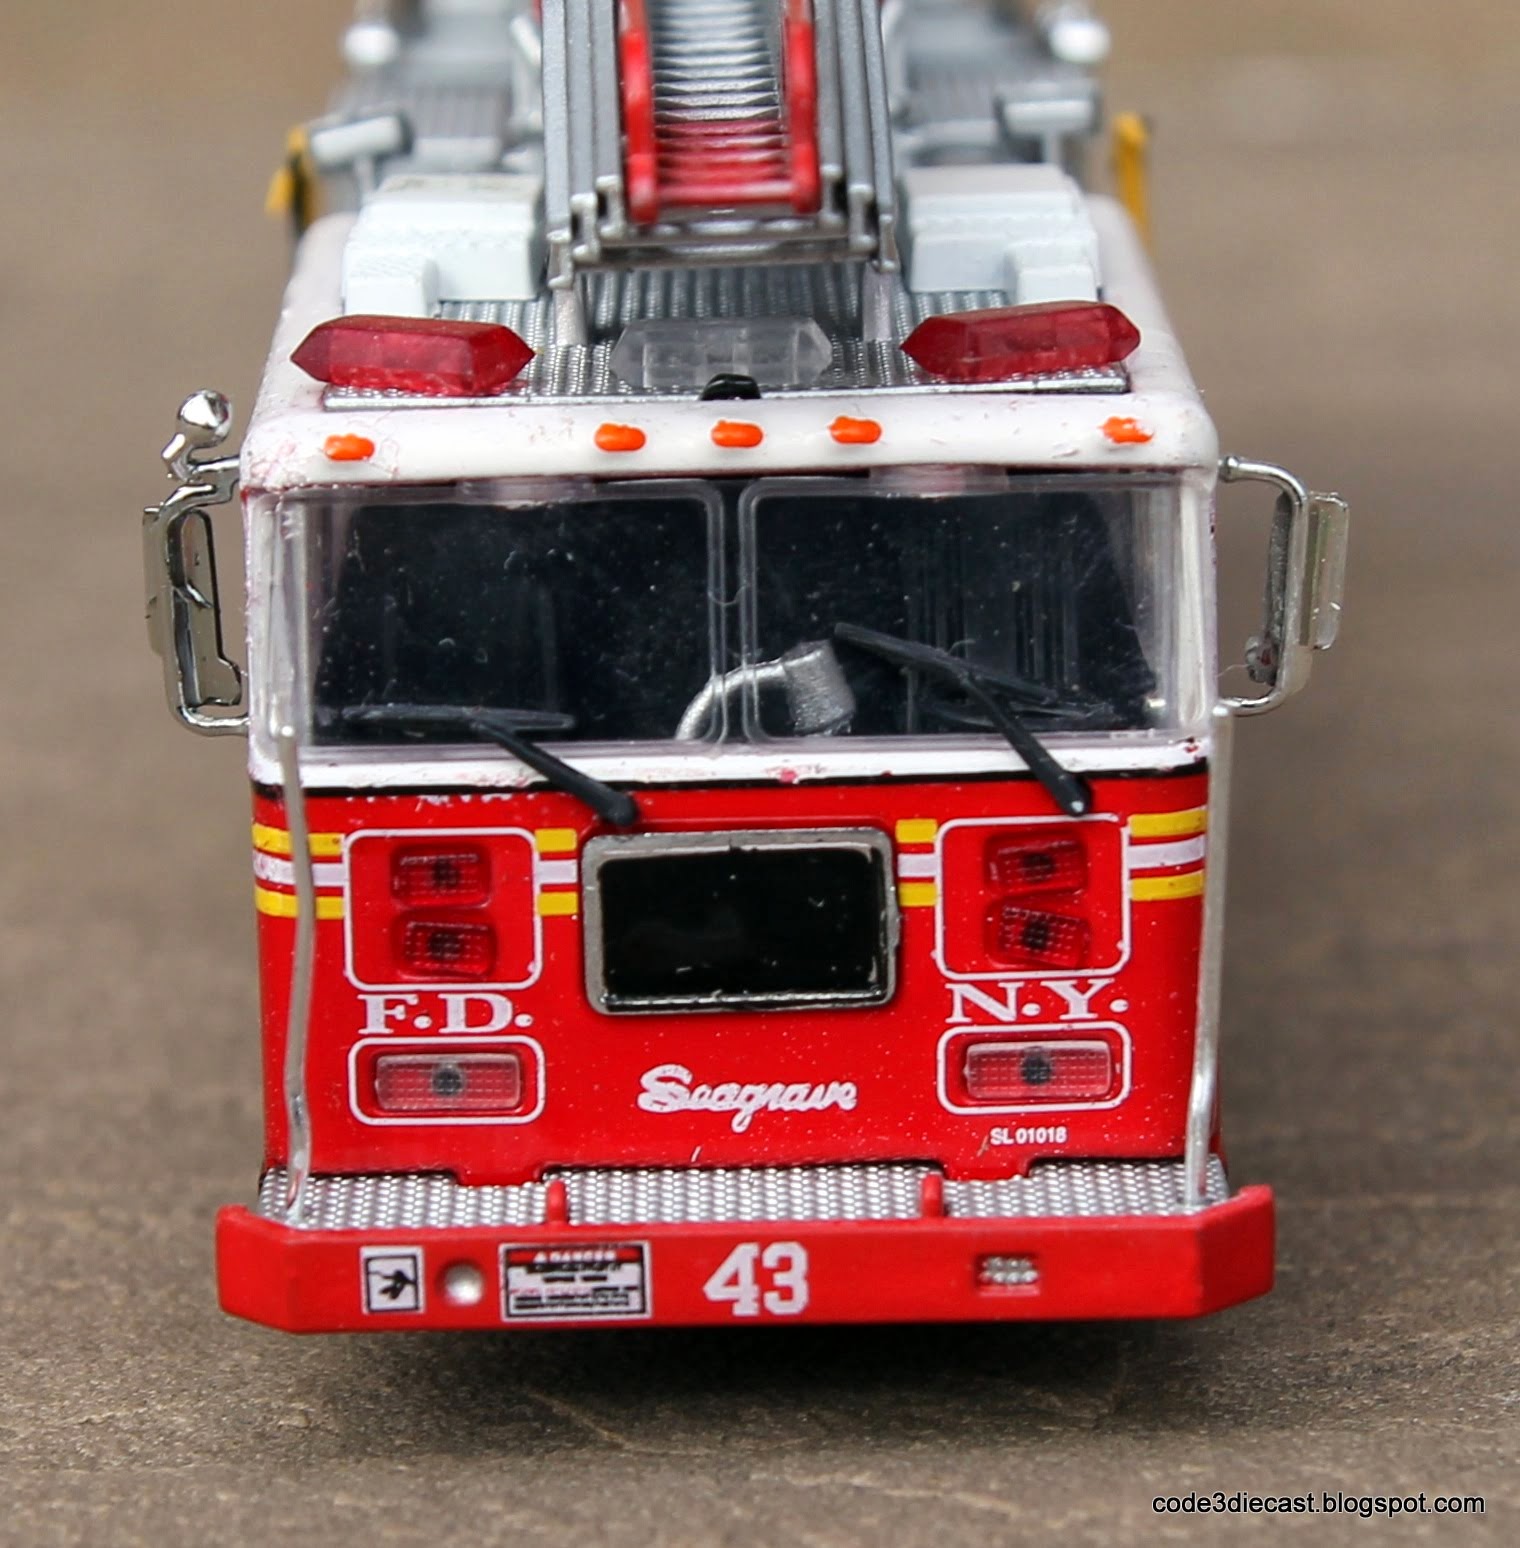 My Code 3 Diecast Fire Truck Collection: Seagrave Rear Mount Ladder FDNY #43